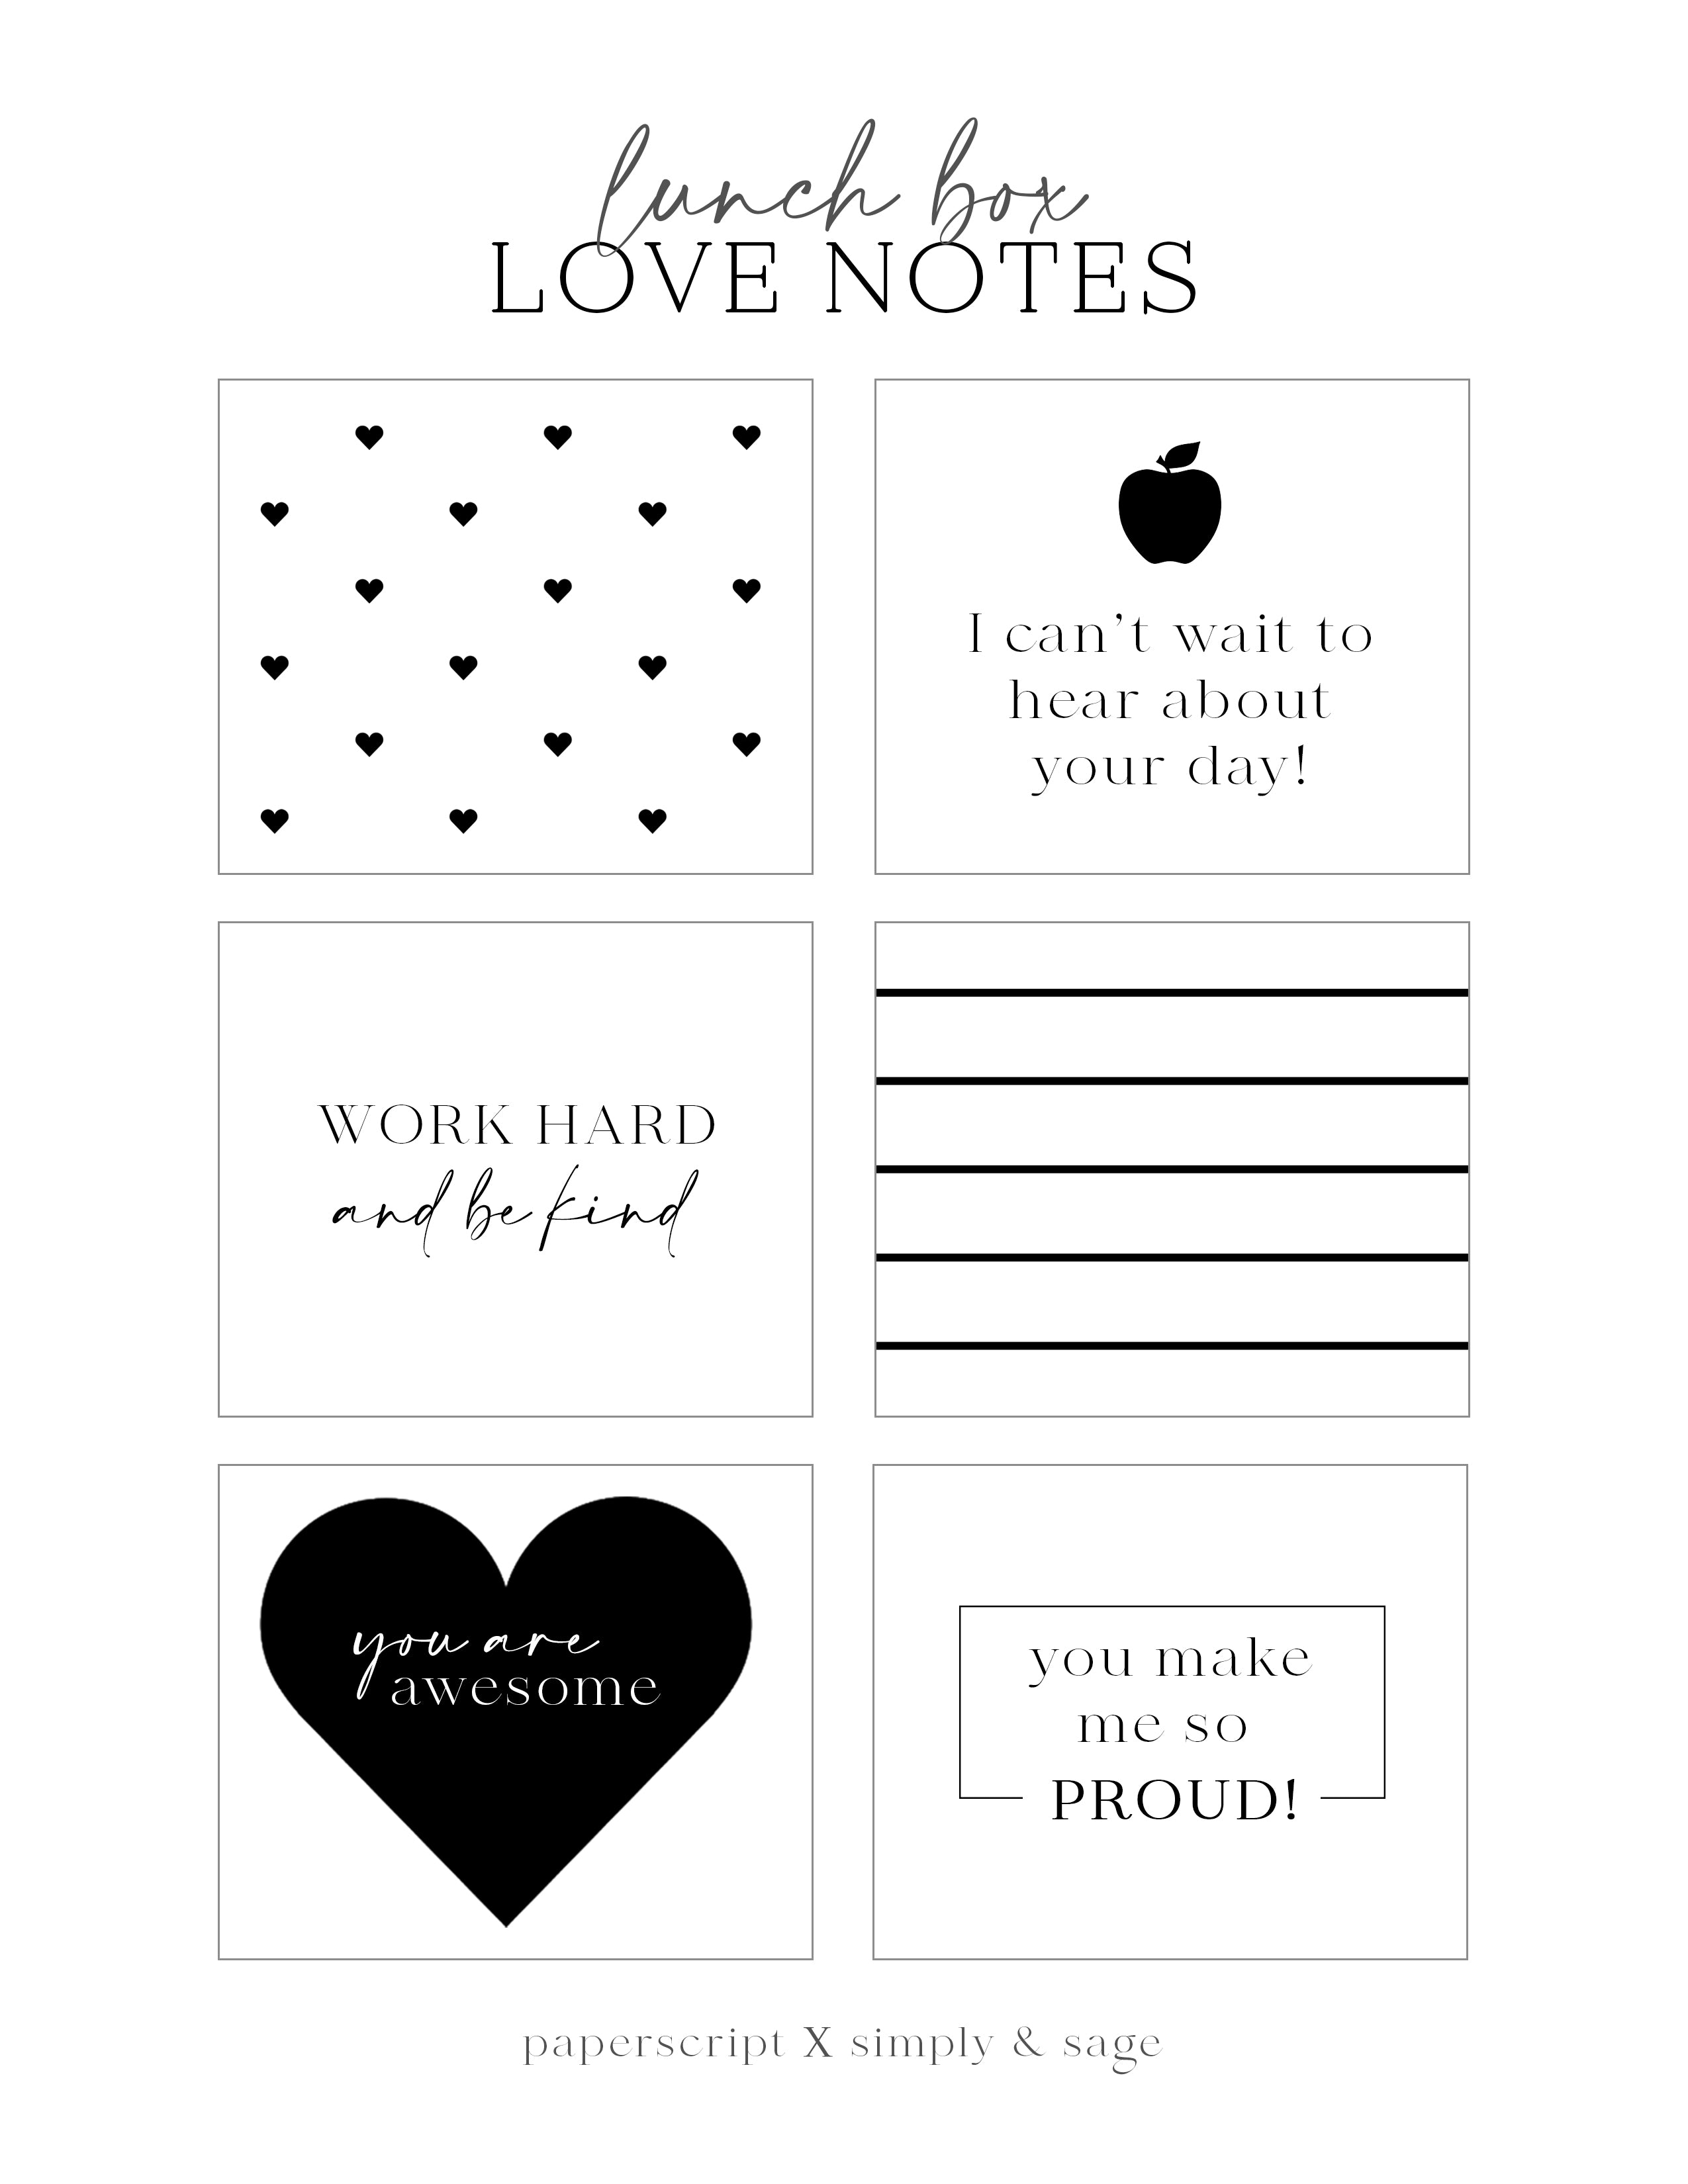 Lunch Box Love Notes | FREE Printable